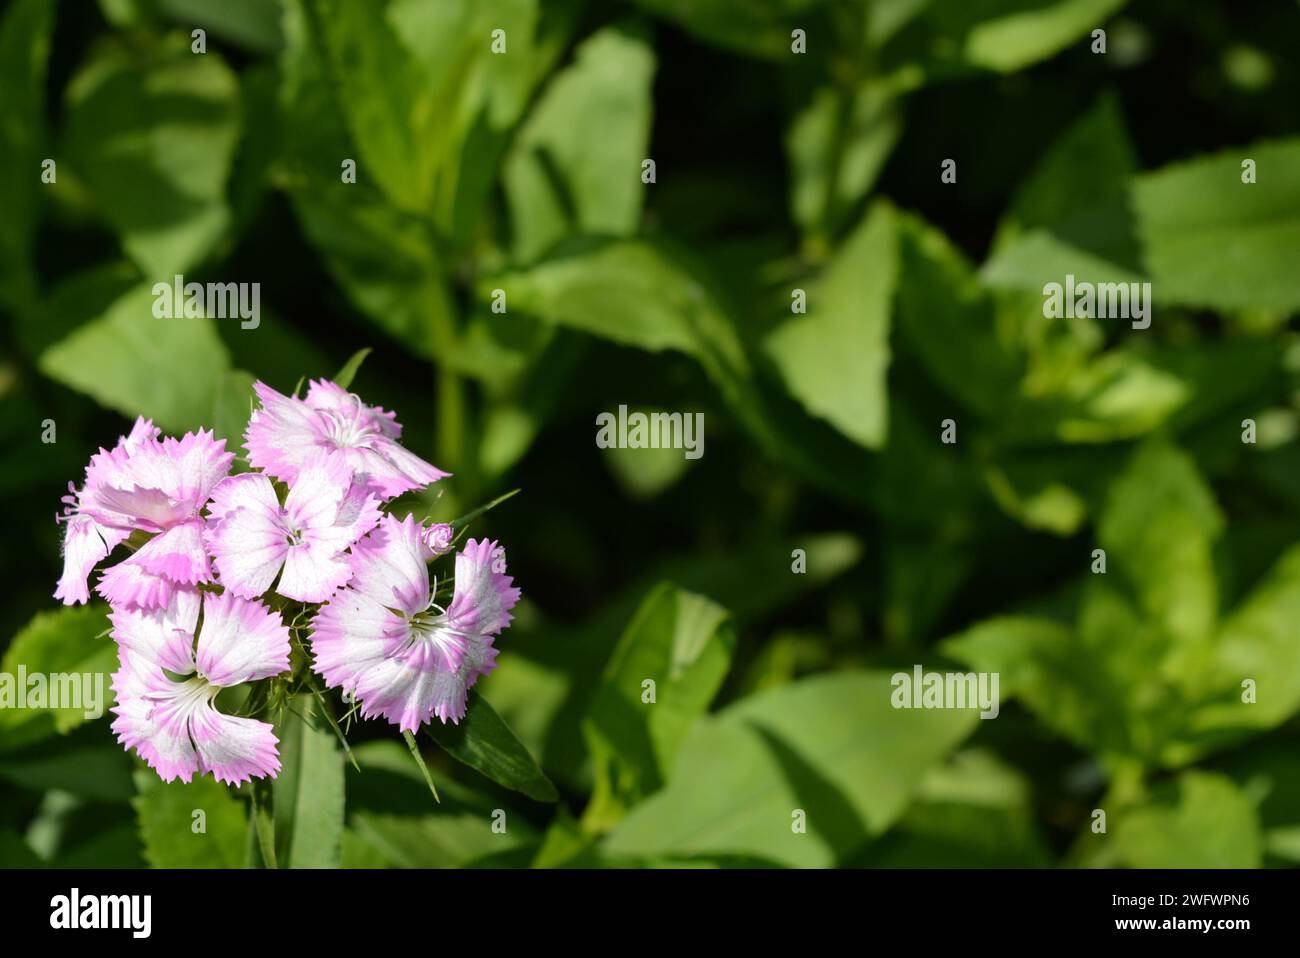 Nature, beautiful and bright purple white flowers growing in home garden. Flowering phlox bushes, Ancient Greek,  phloxes,  phlges. Stock Photo